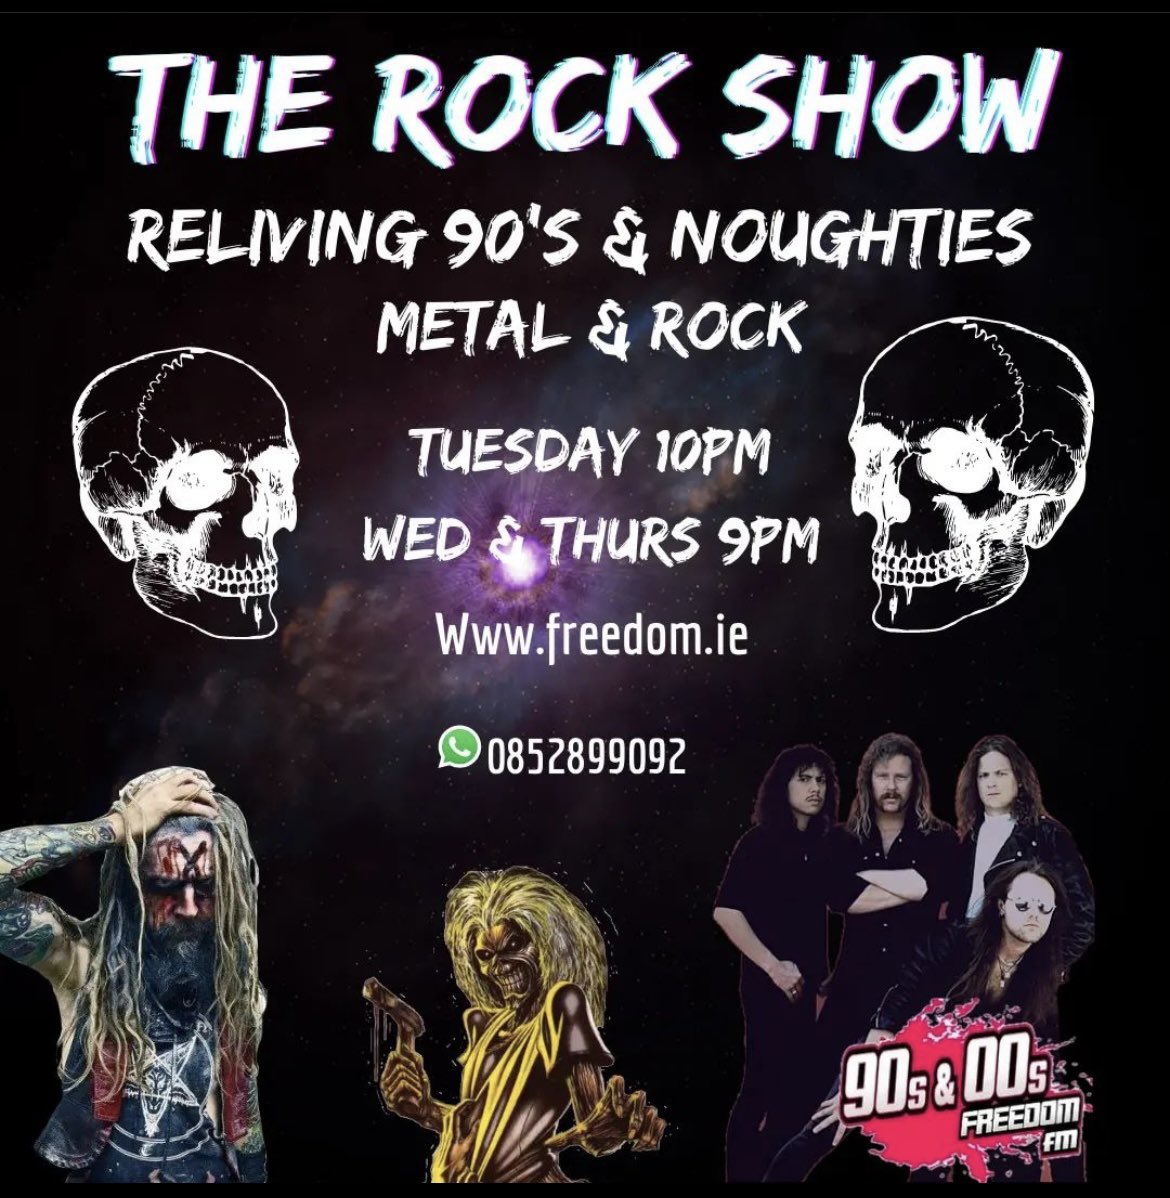 Relive the best of Metal and Alternative Music every Tuesday - Thursday #90srock #00srock #tuesdaymotivations